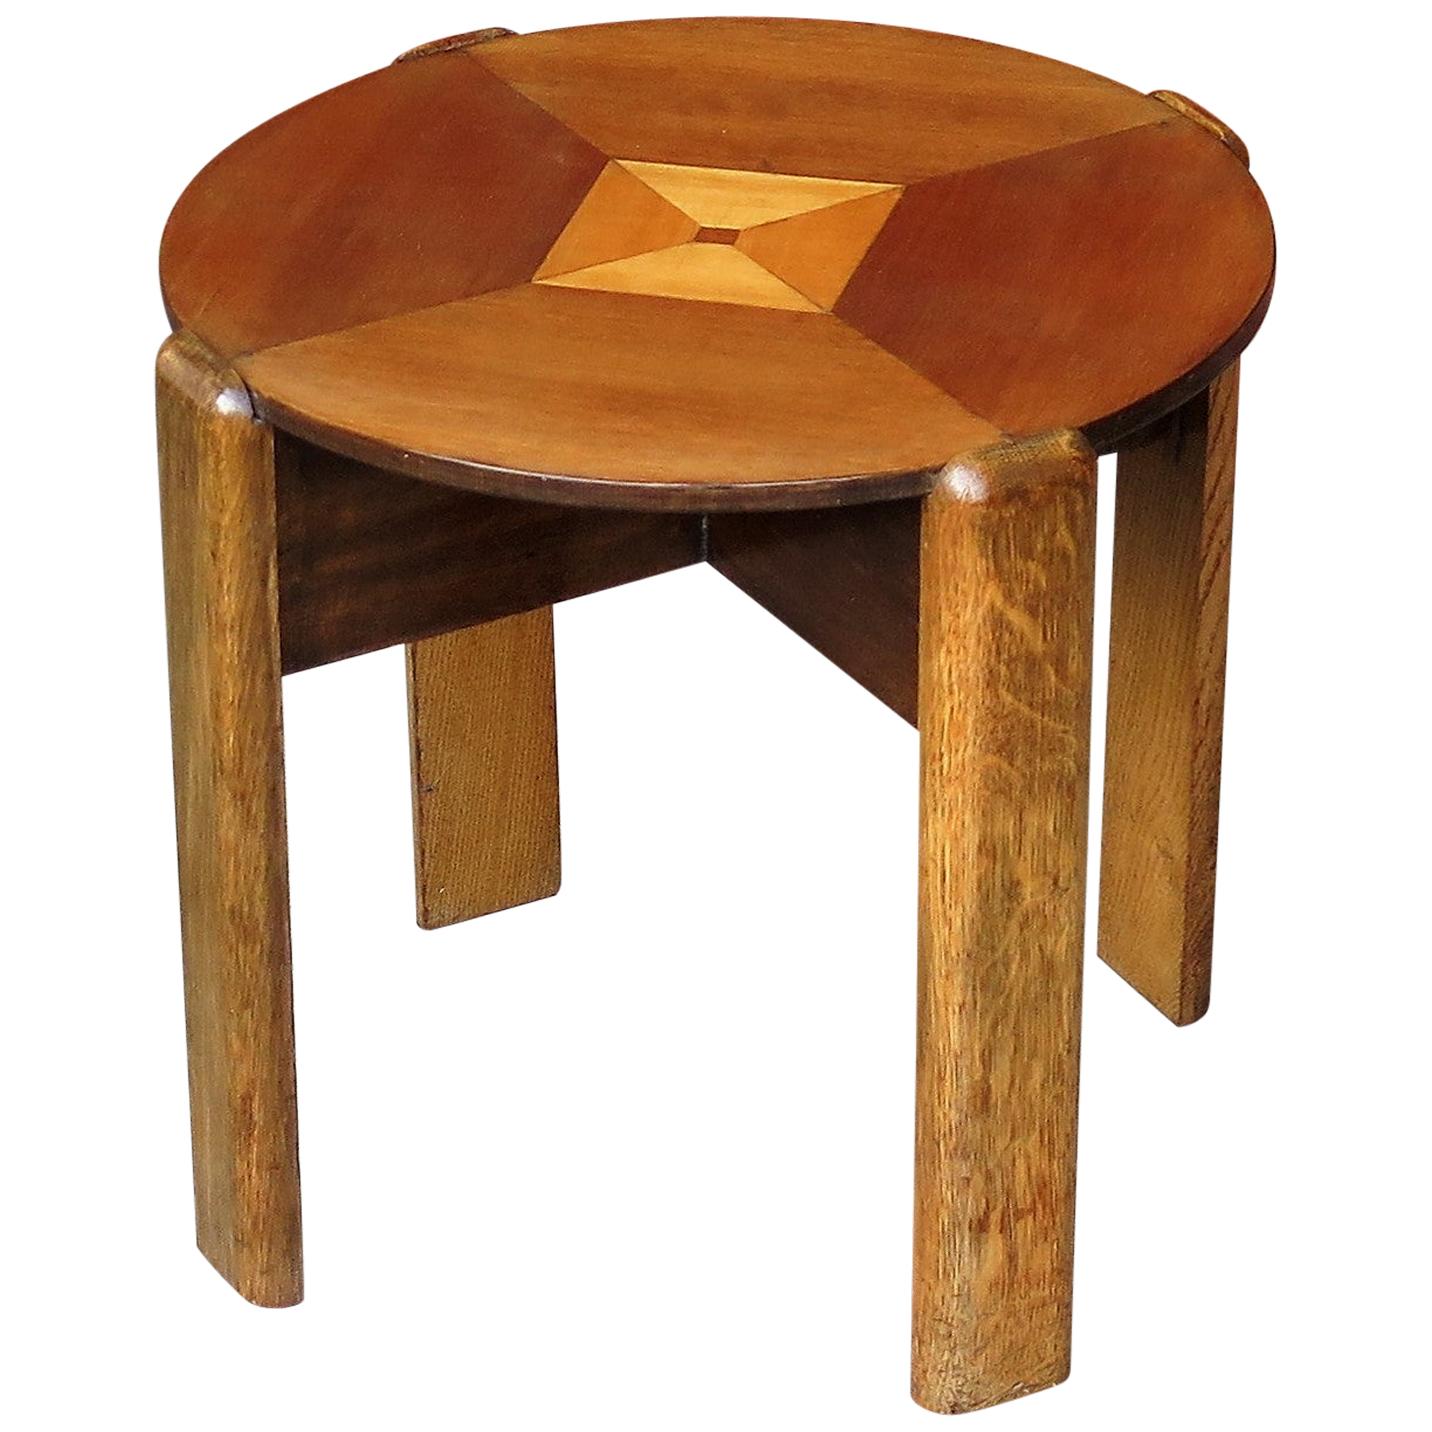 Art Deco Period Occasional Table with Quarter Veneered Top and Oak Legs, Ca 1930